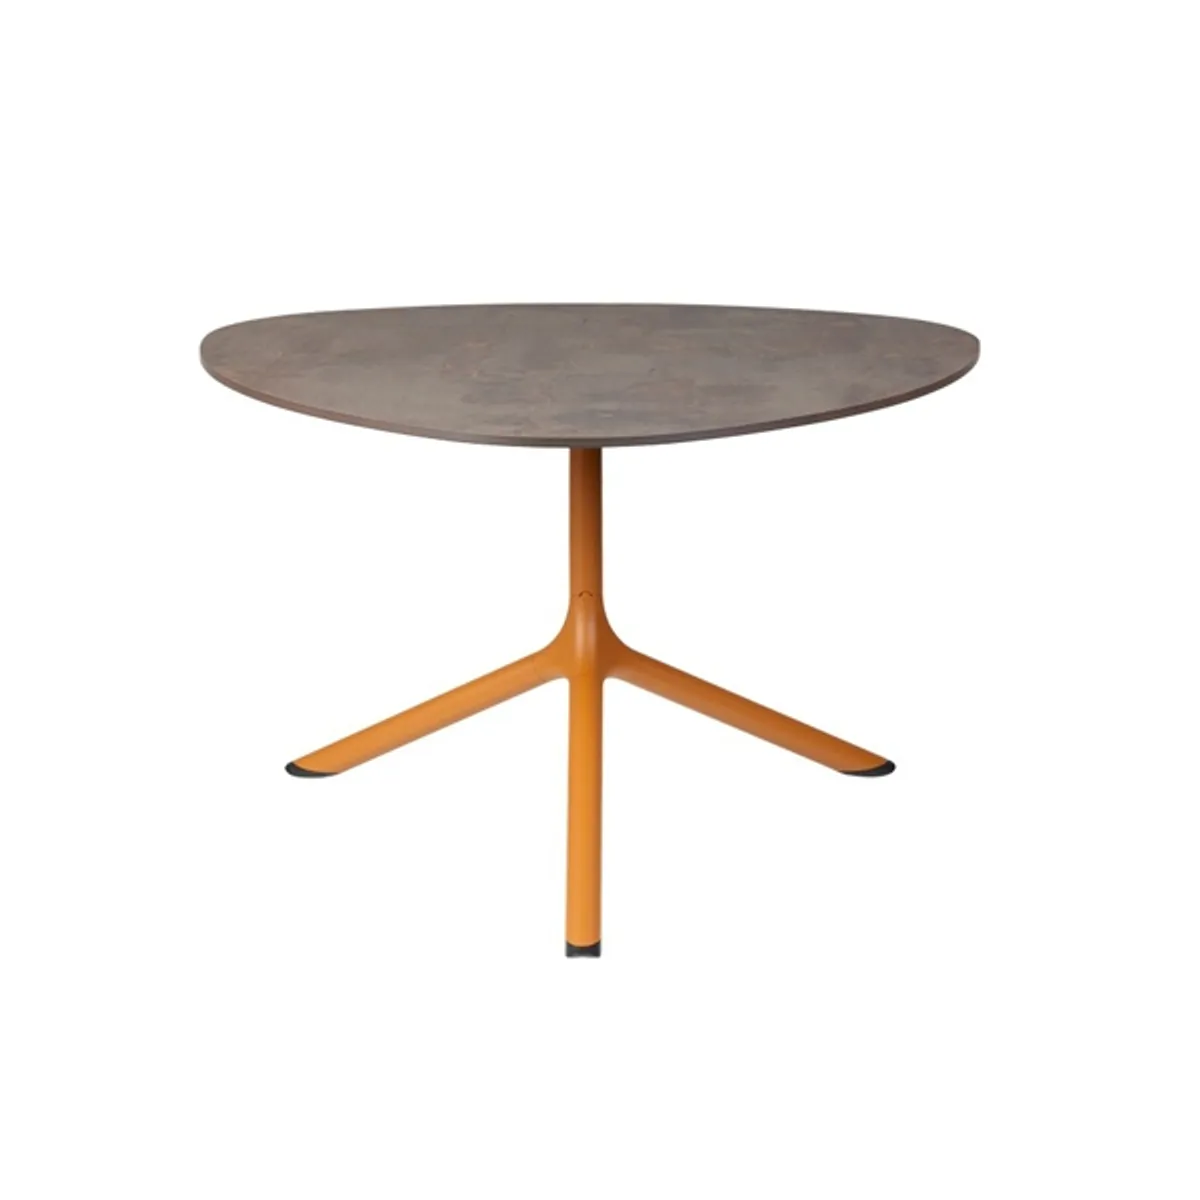 Trinette triangular table Inside Out Contracts3